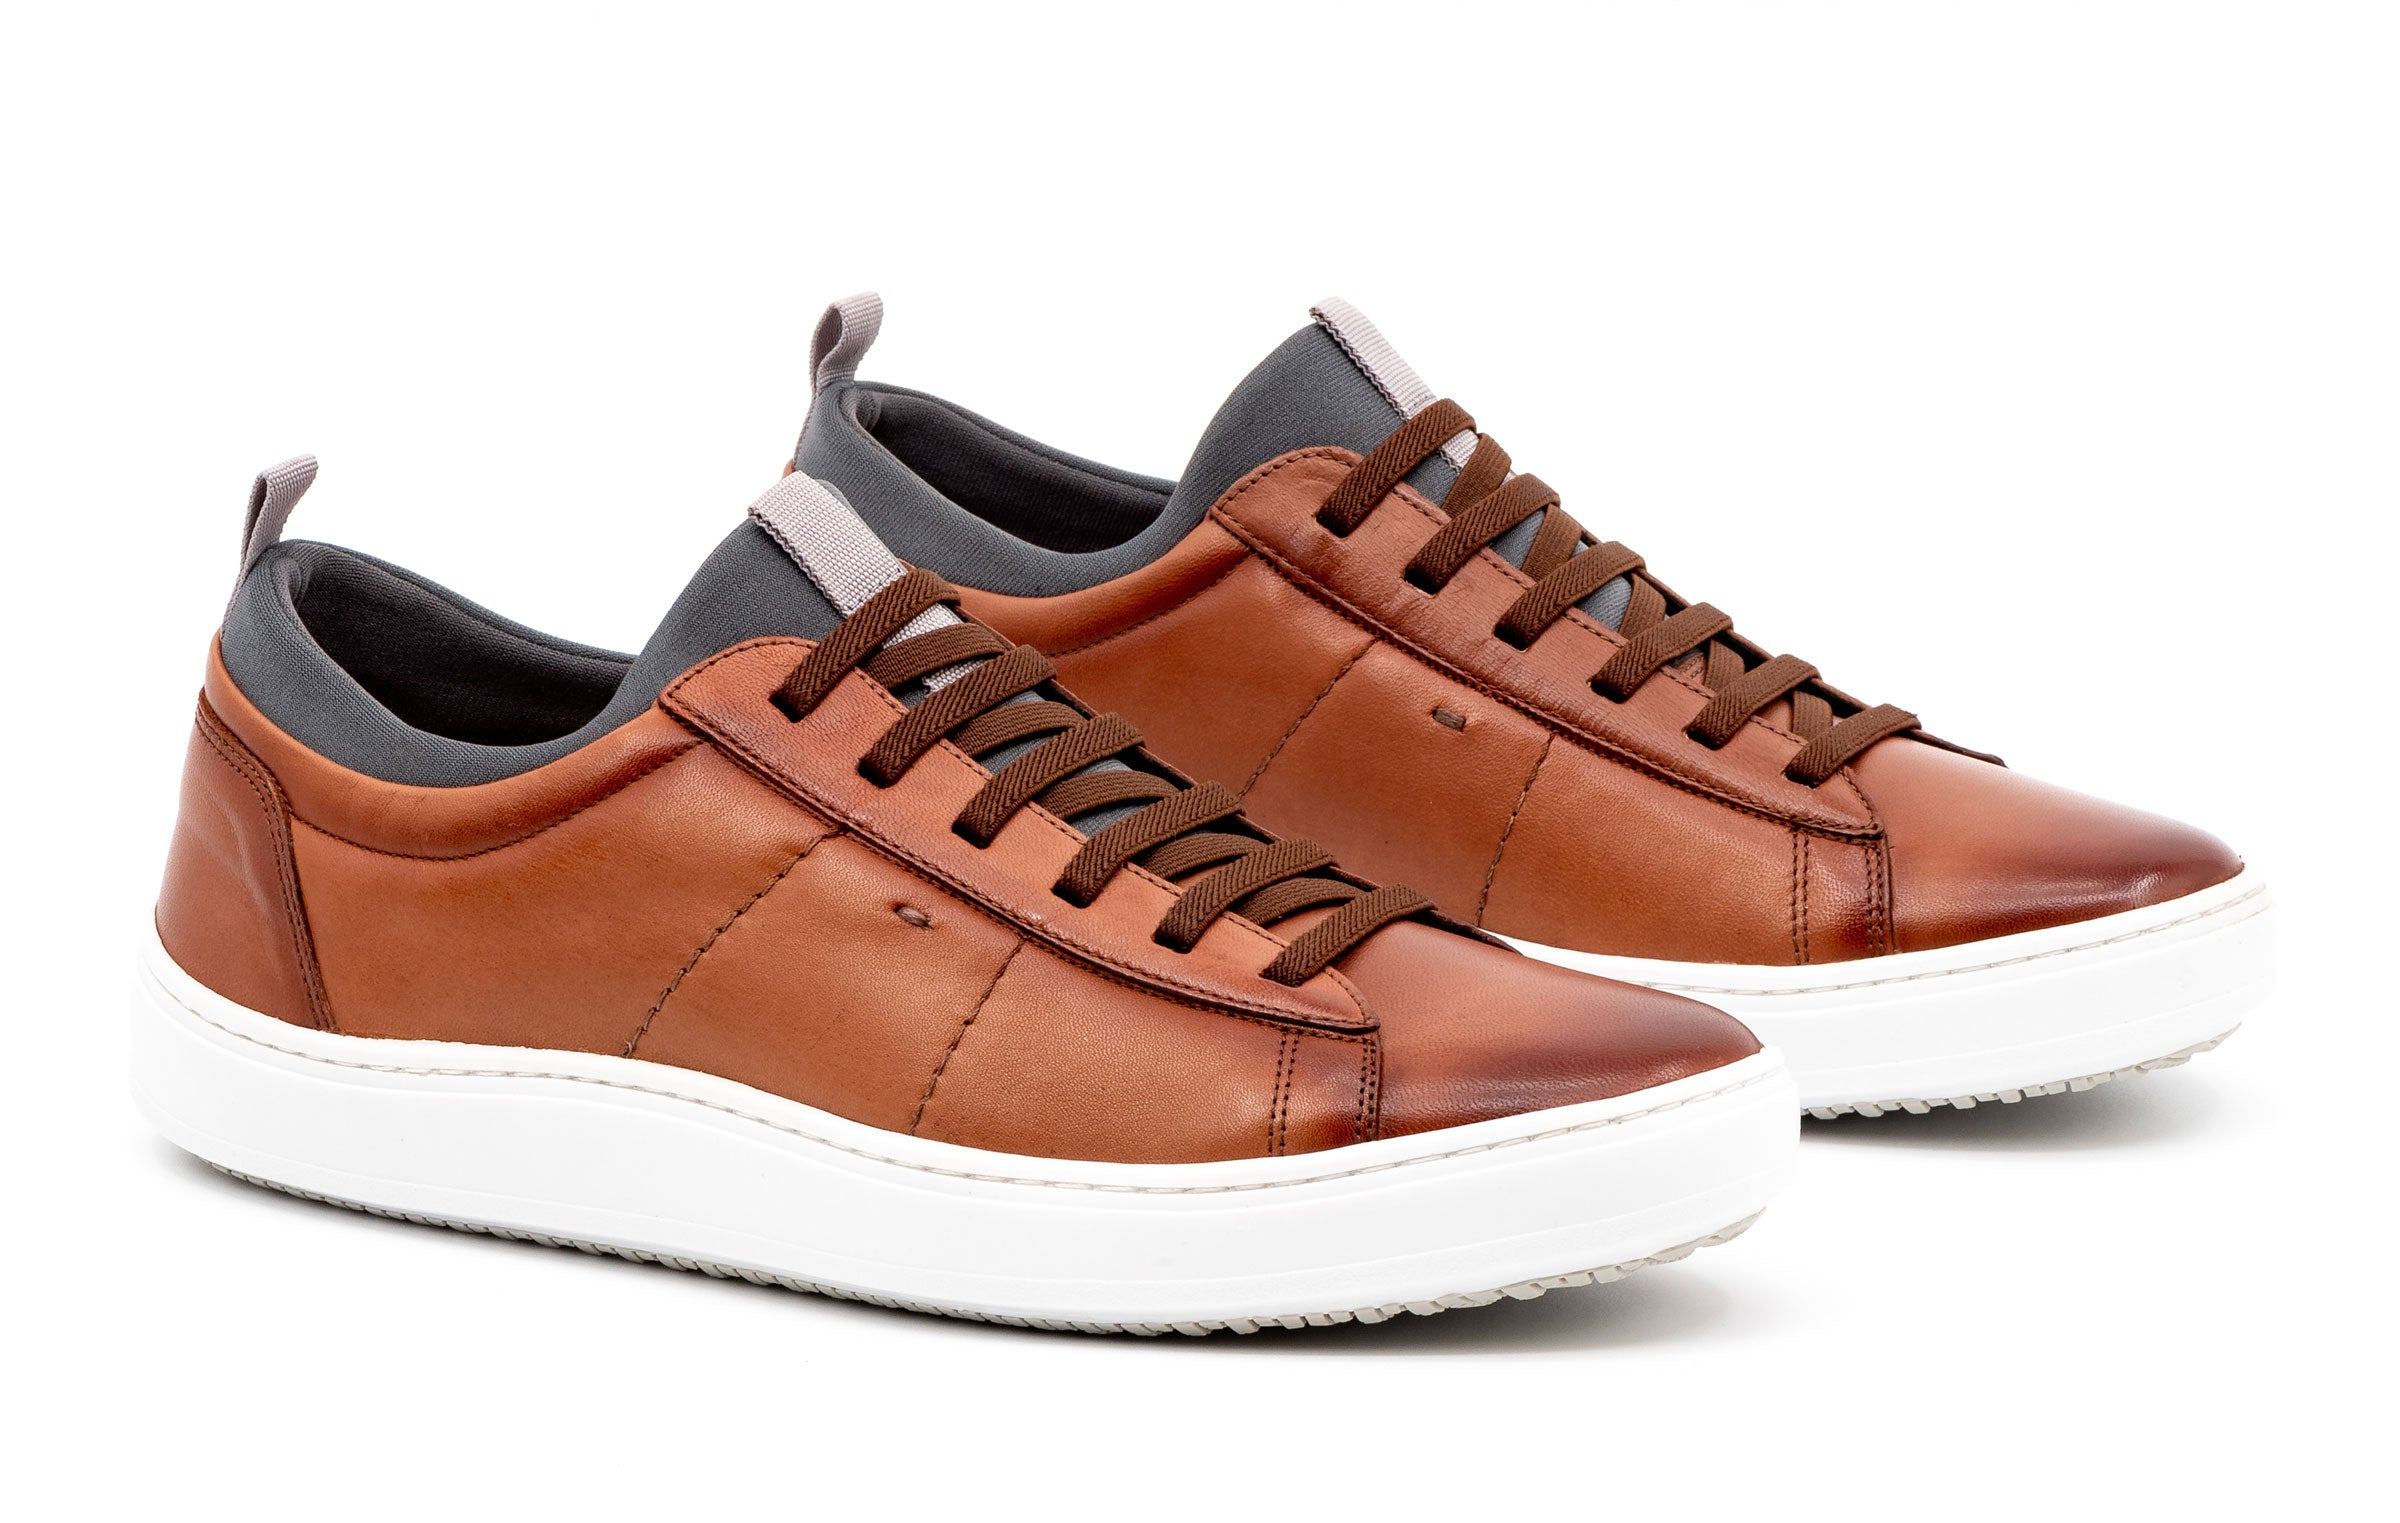 Cameron Hand Finished Sheep Skin Leather Sneakers - Whiskey